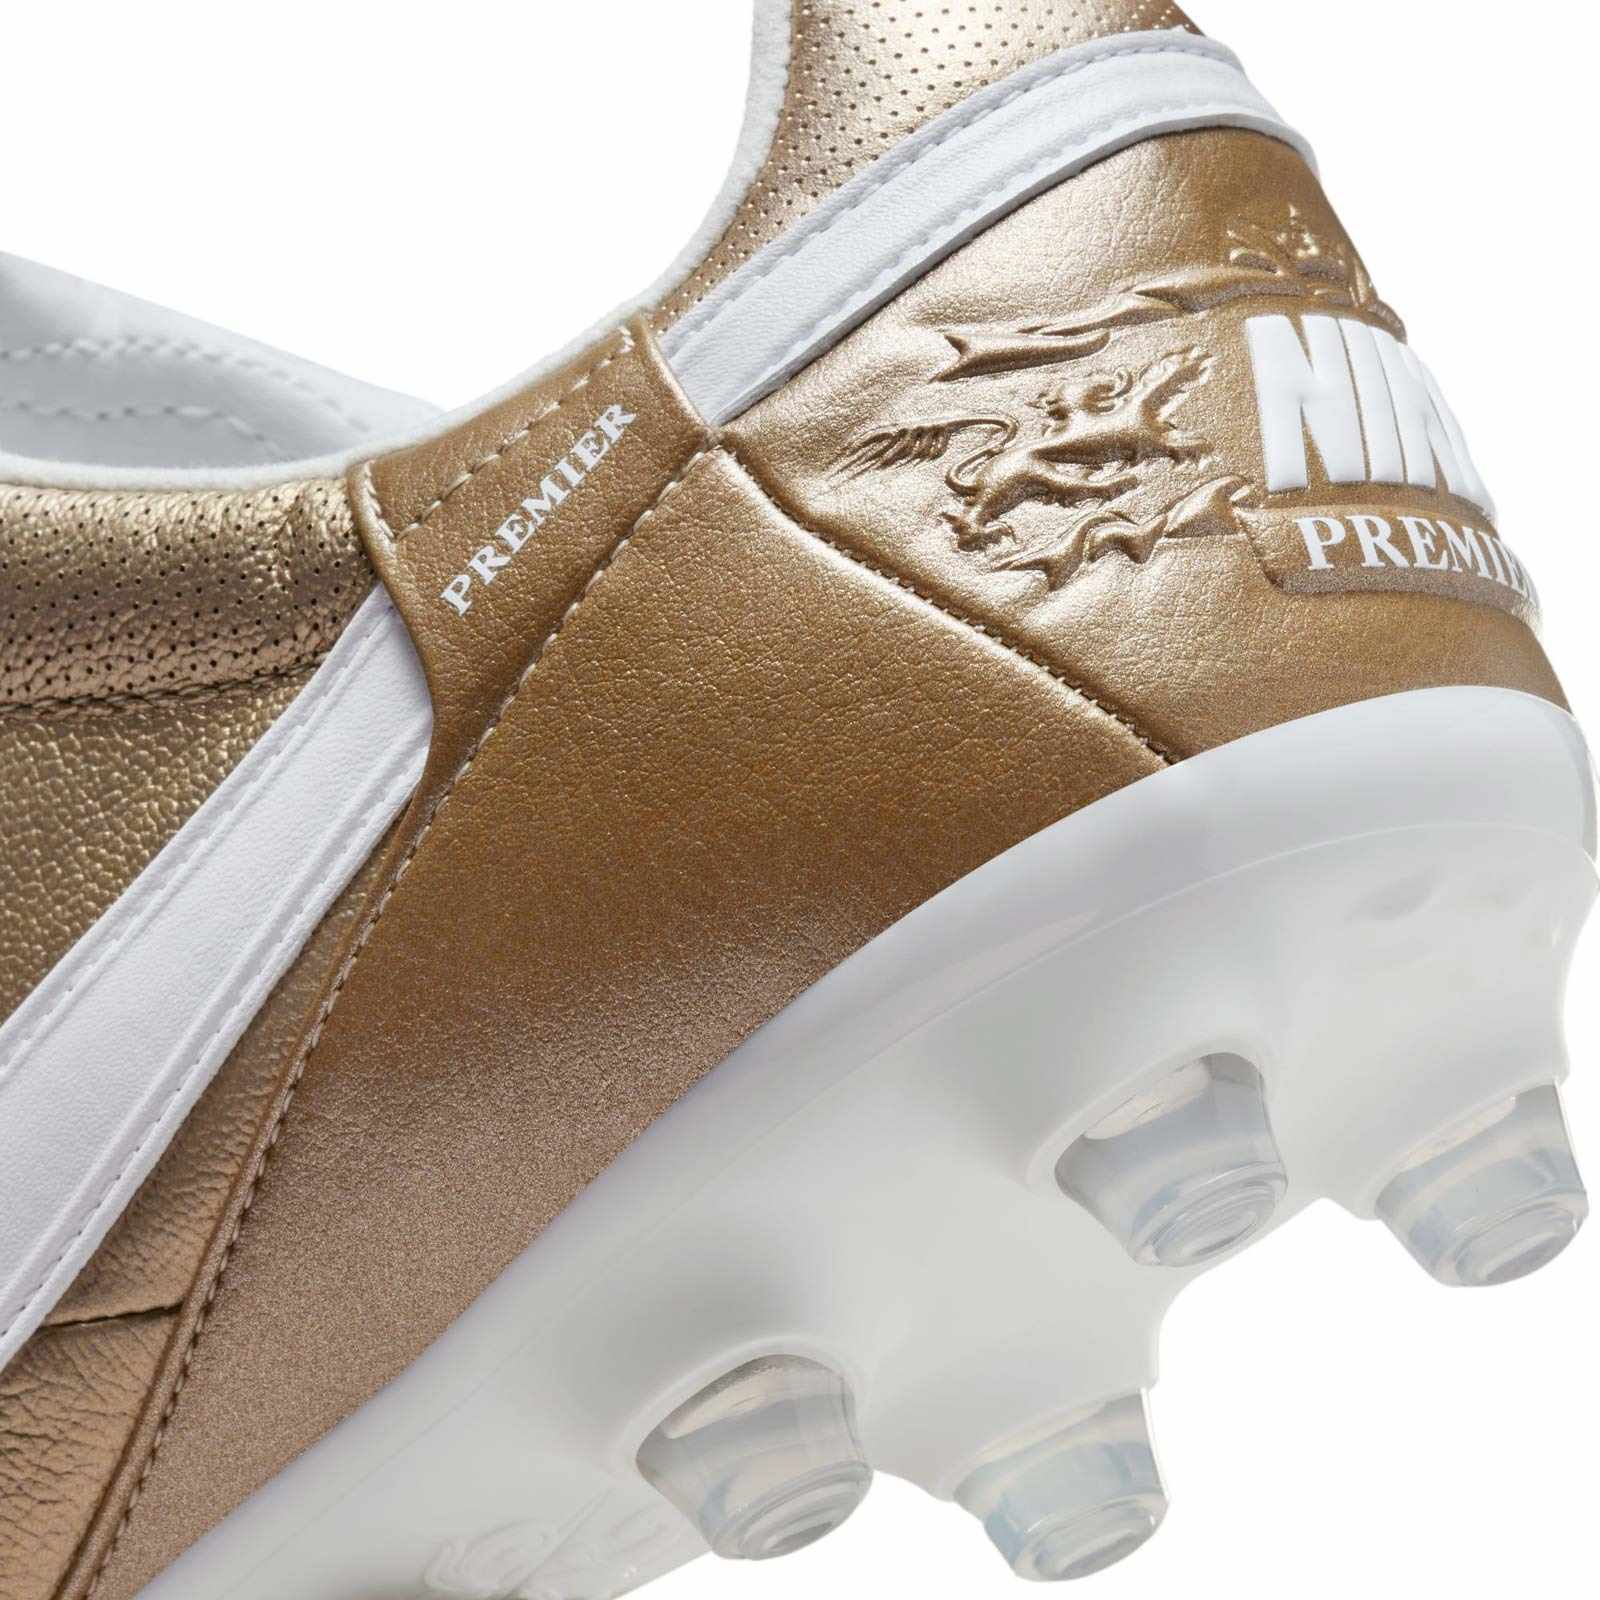 NIKE PREMIER 3 FG FIRM-GROUND FOOTBALL BOOTS